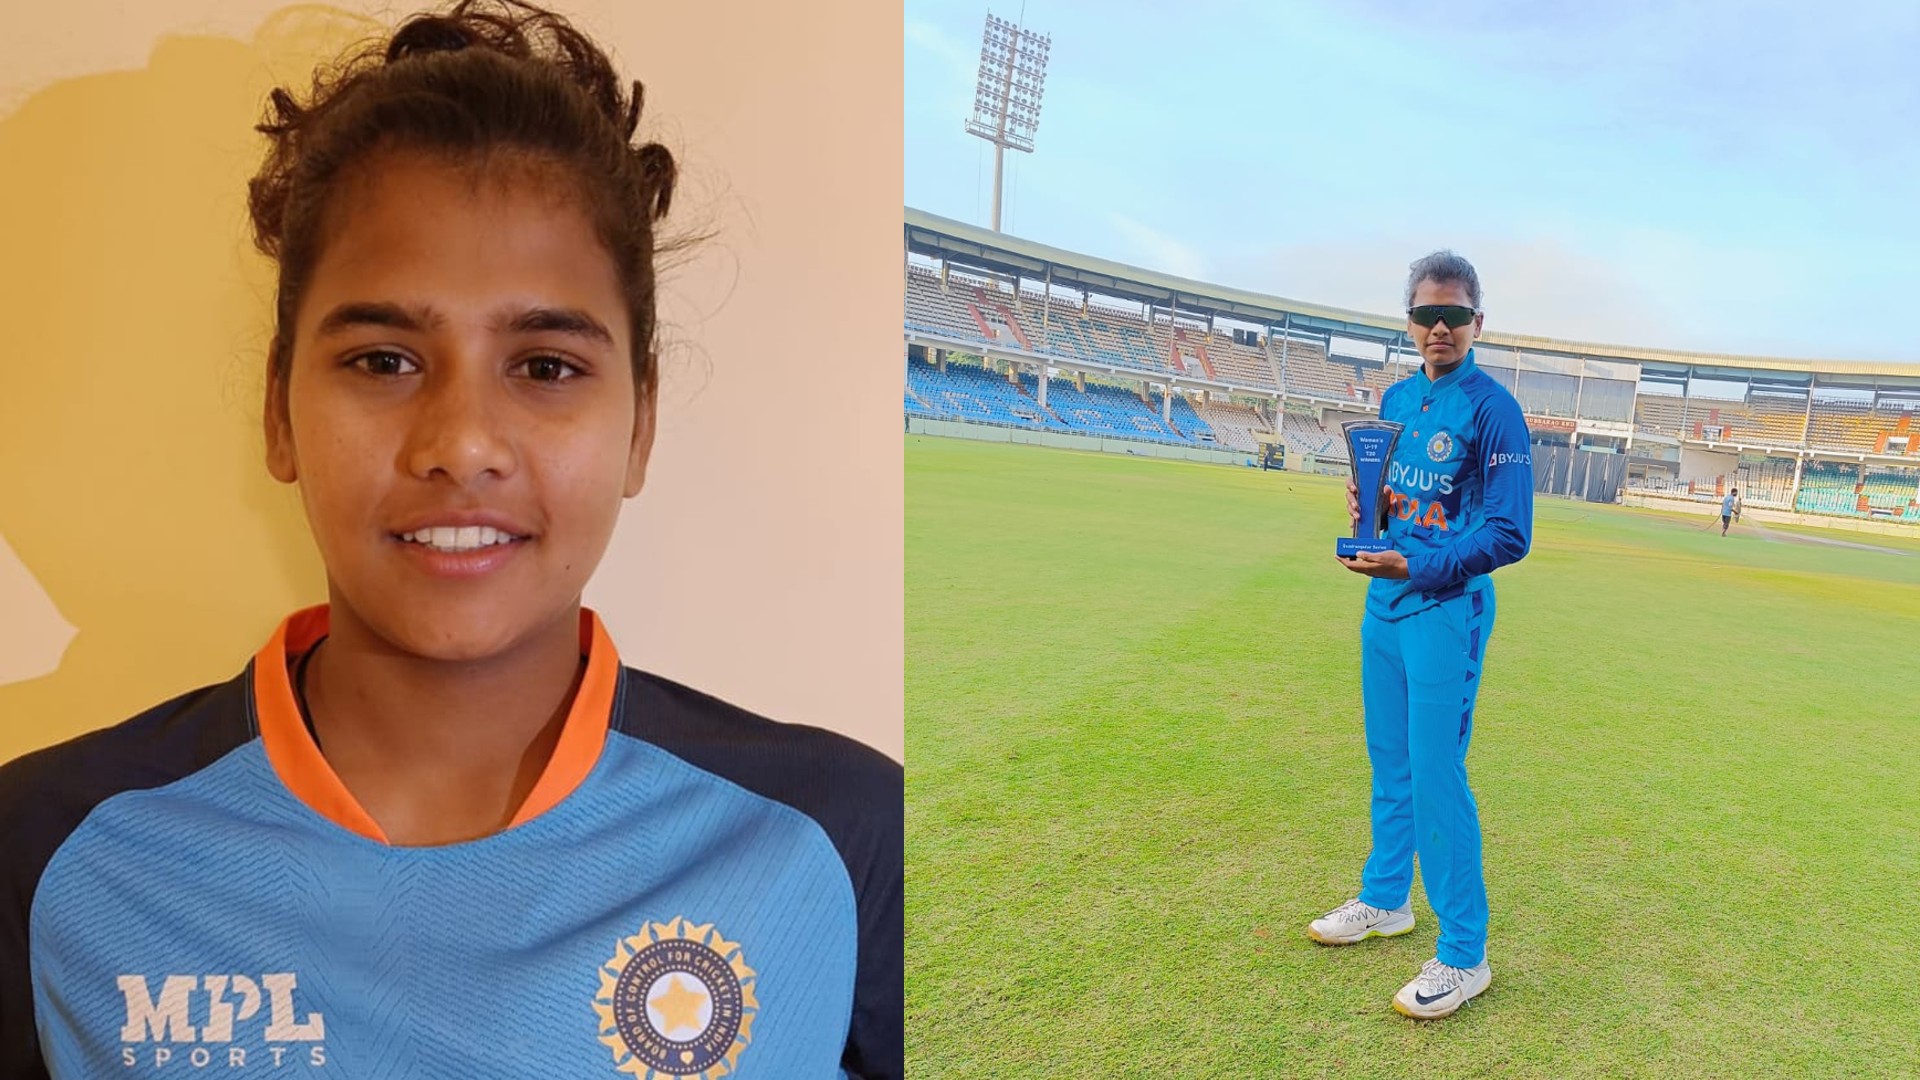 up unnao cricketer archana devi selected in U 19 T20 World Cup and SA  series know struggle success story smup | Cricket News: कभी बैट खरीदने के  नहीं थे पैसे, अब अंडर-19